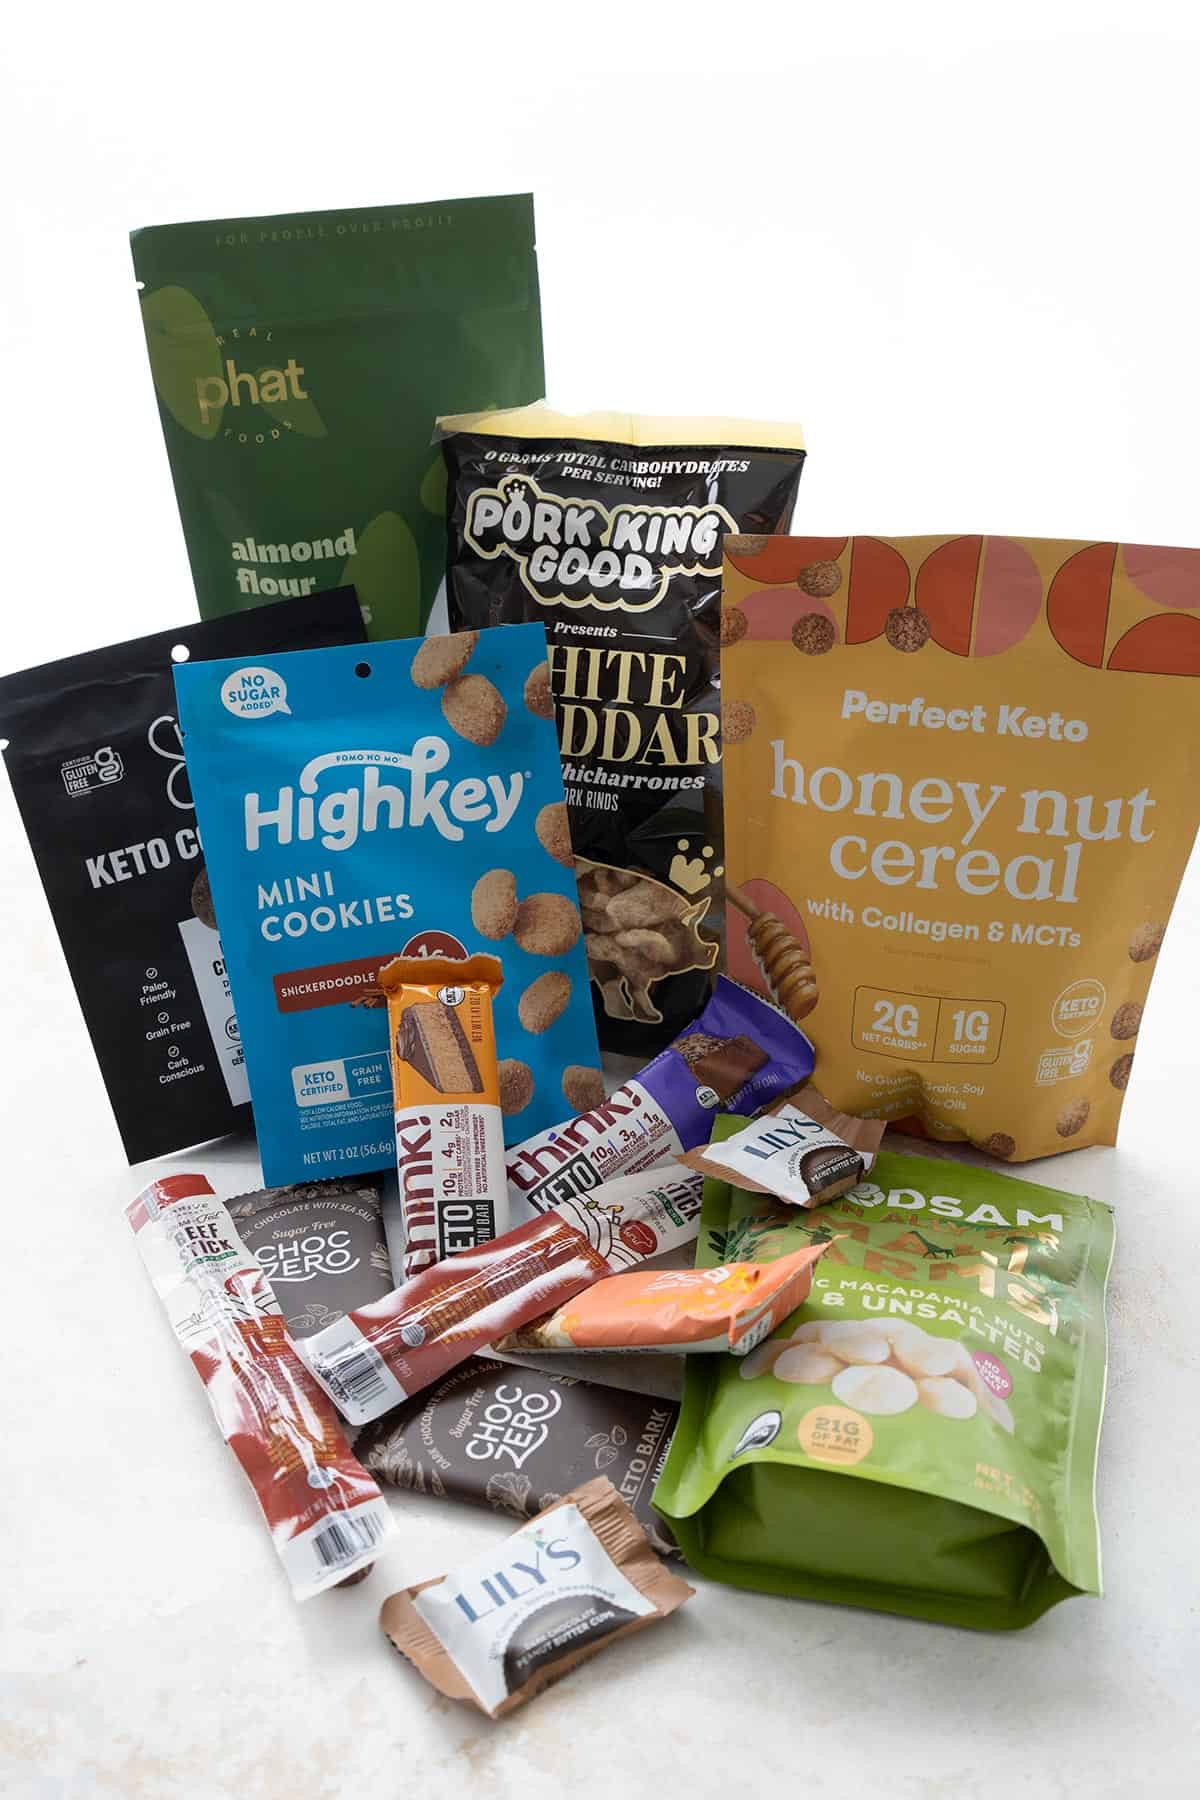 A collection of keto snacks you can by on a white table, including meat sticks, energy bars, cookies, and cereal.